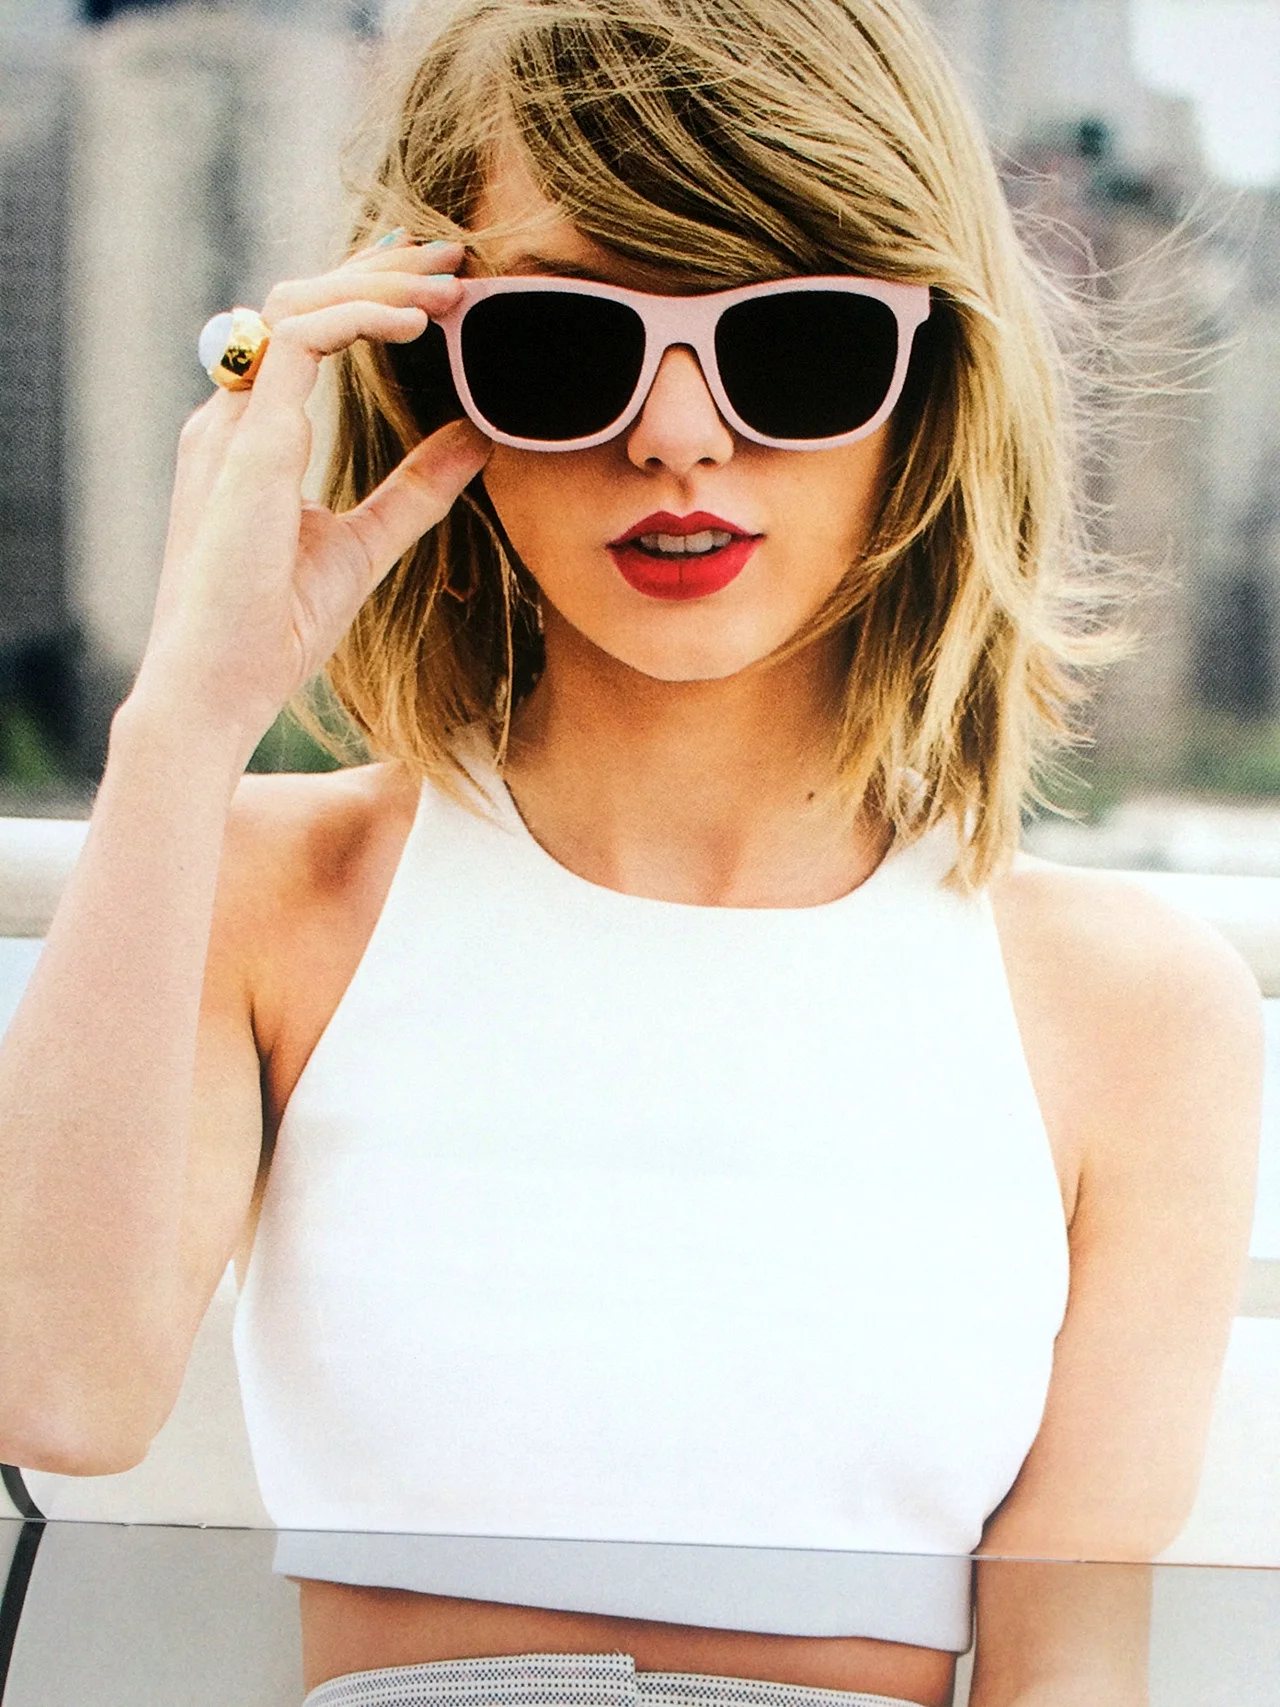 Taylor Swift 1989 Wallpaper For iPhone